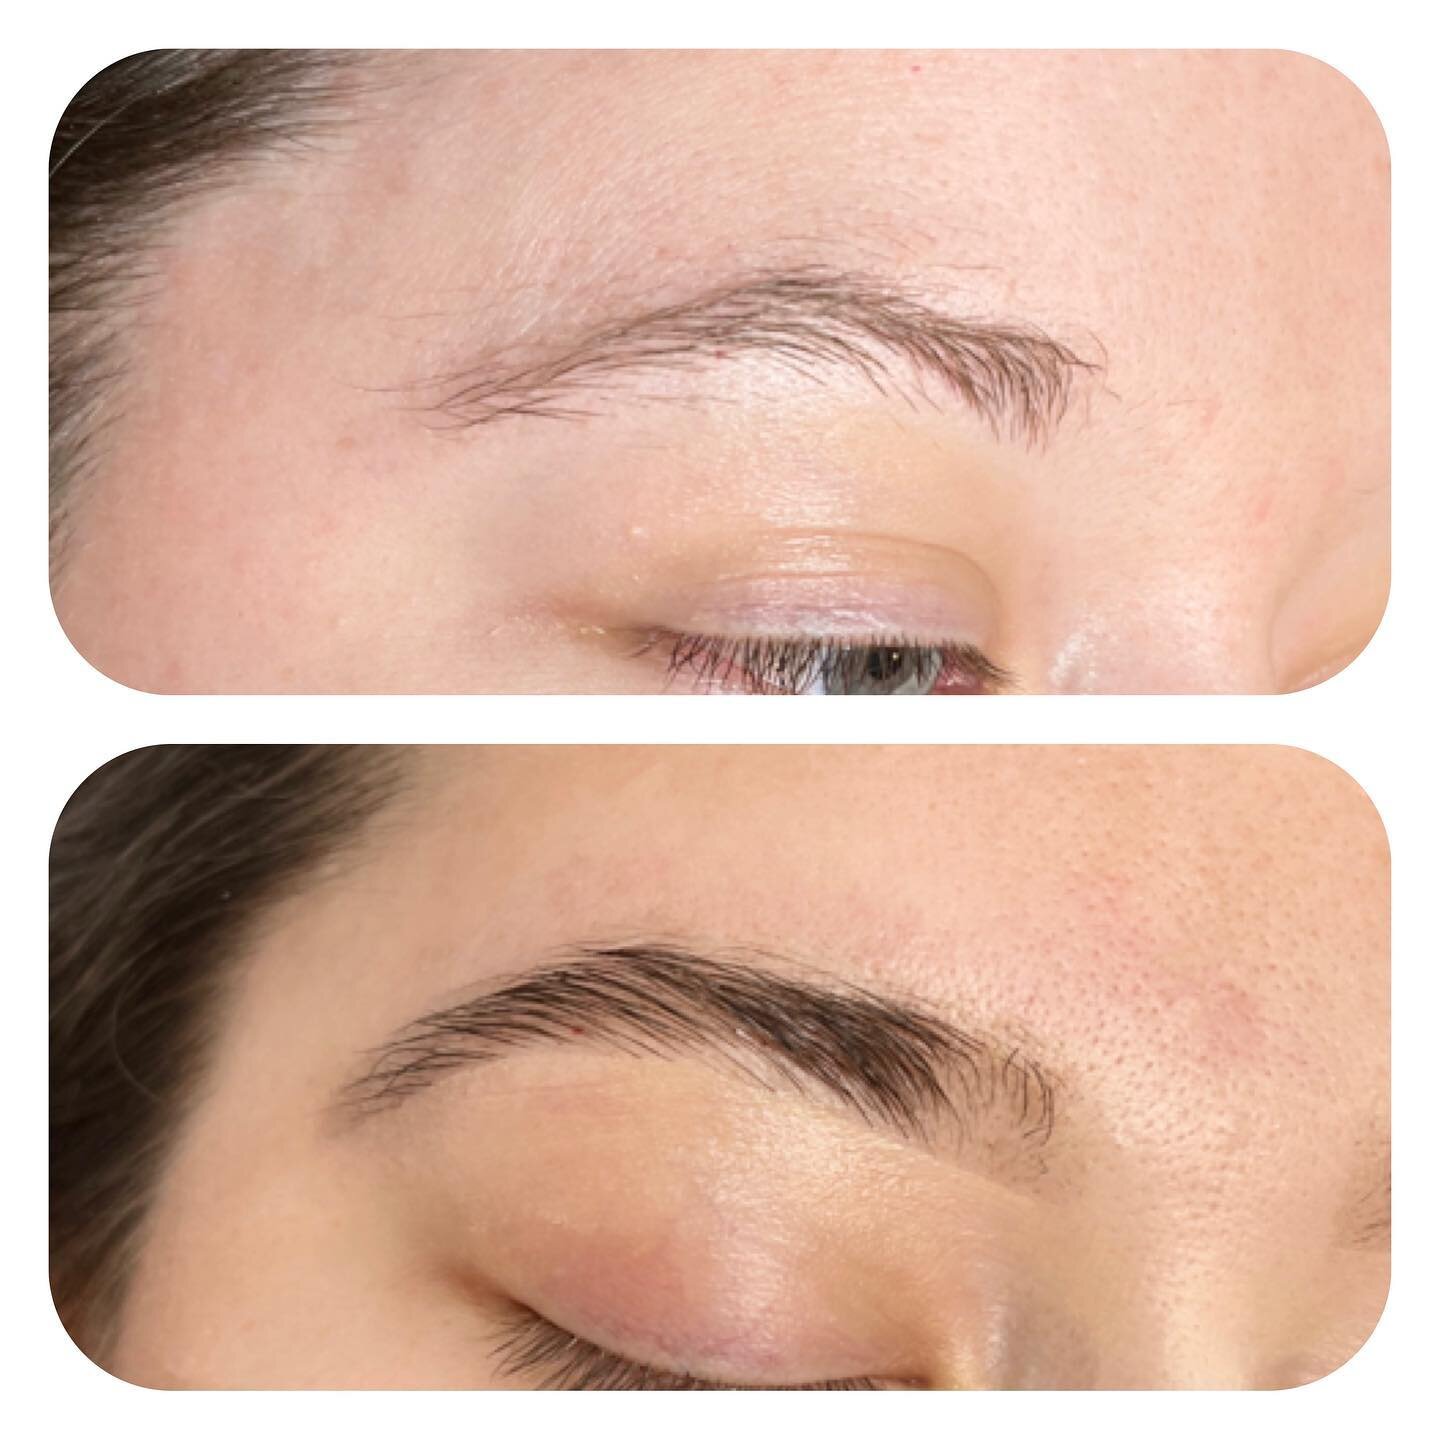 Another brow rehab✨ If you swipe you can see where her Brows started in March 2021. ⁣
⁣
The key is to show my clients where their Brow needs to start, arch, and end. Between appts I ask my clients to put castor oil or any hair growth serum of their c